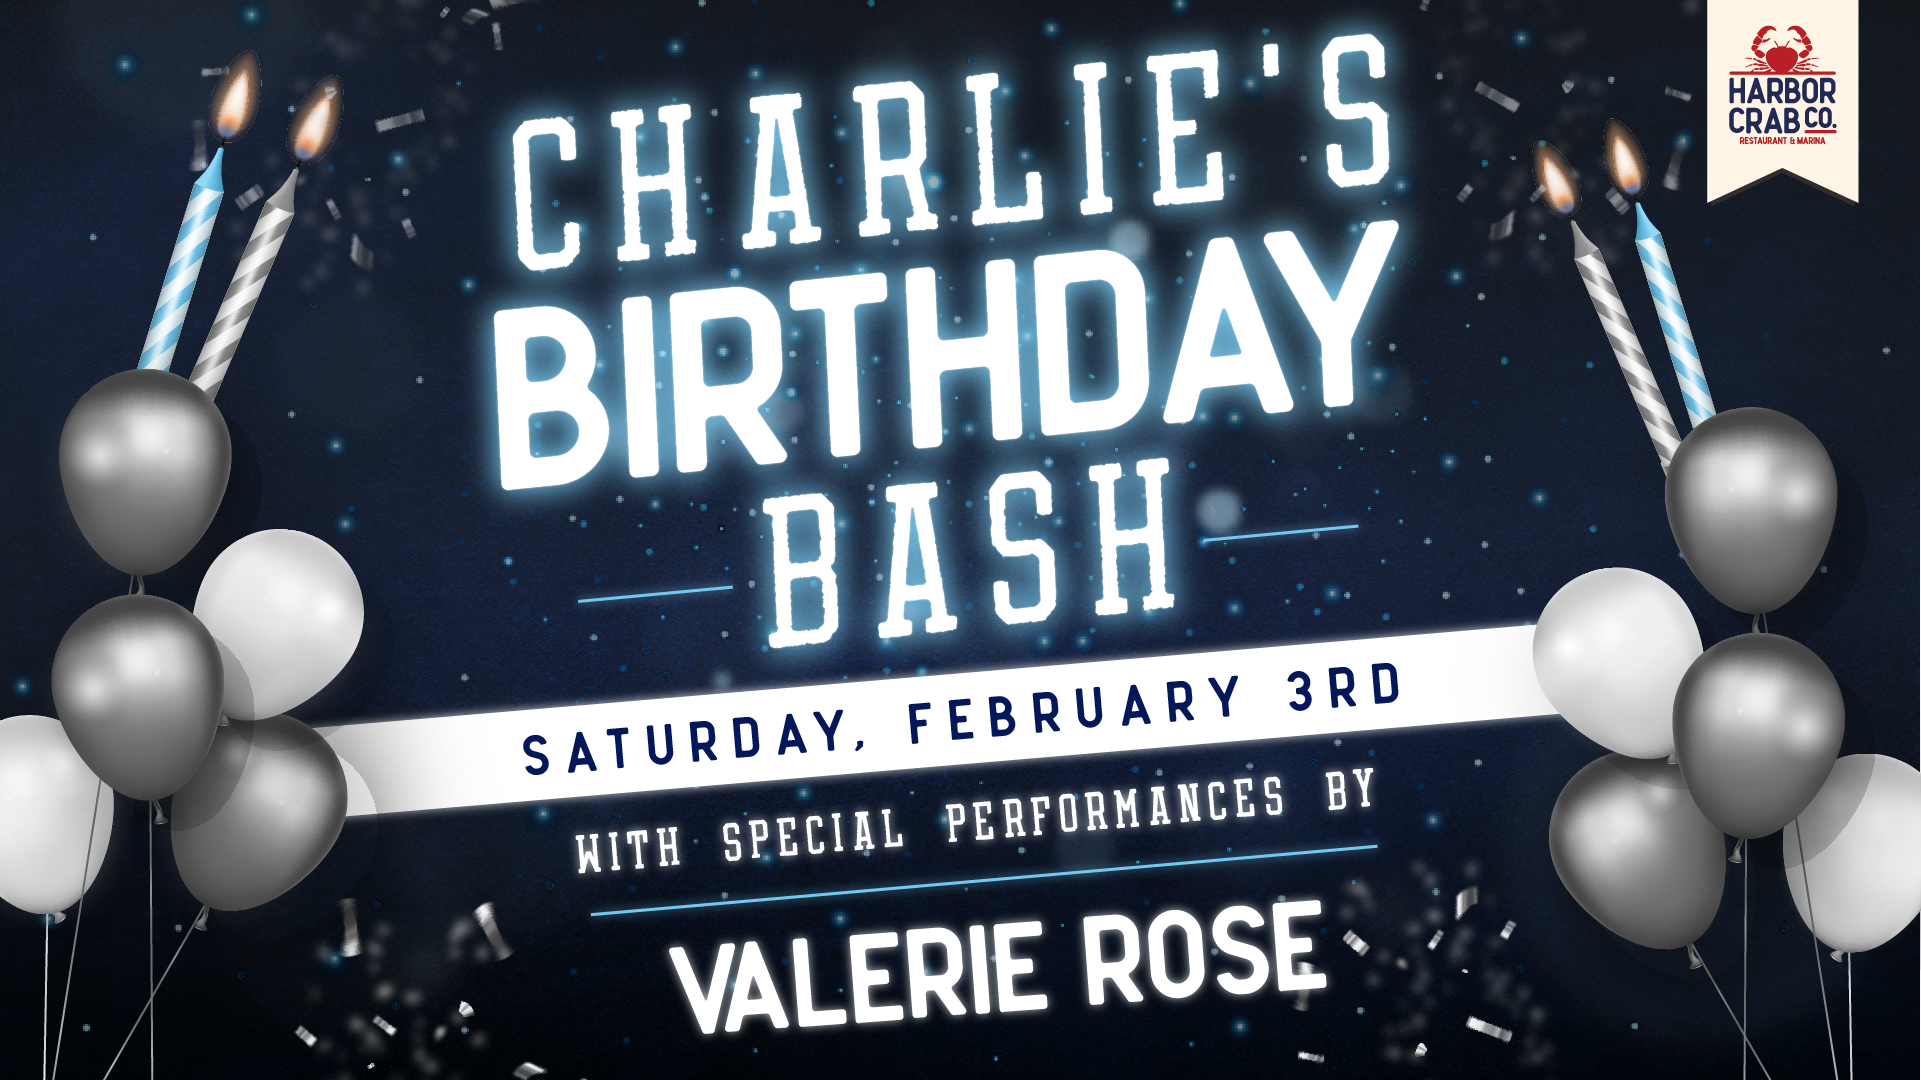 Promotional banner for Charlie's Birthday Bash at Harbor Crab with balloons, candles, and details of the event.